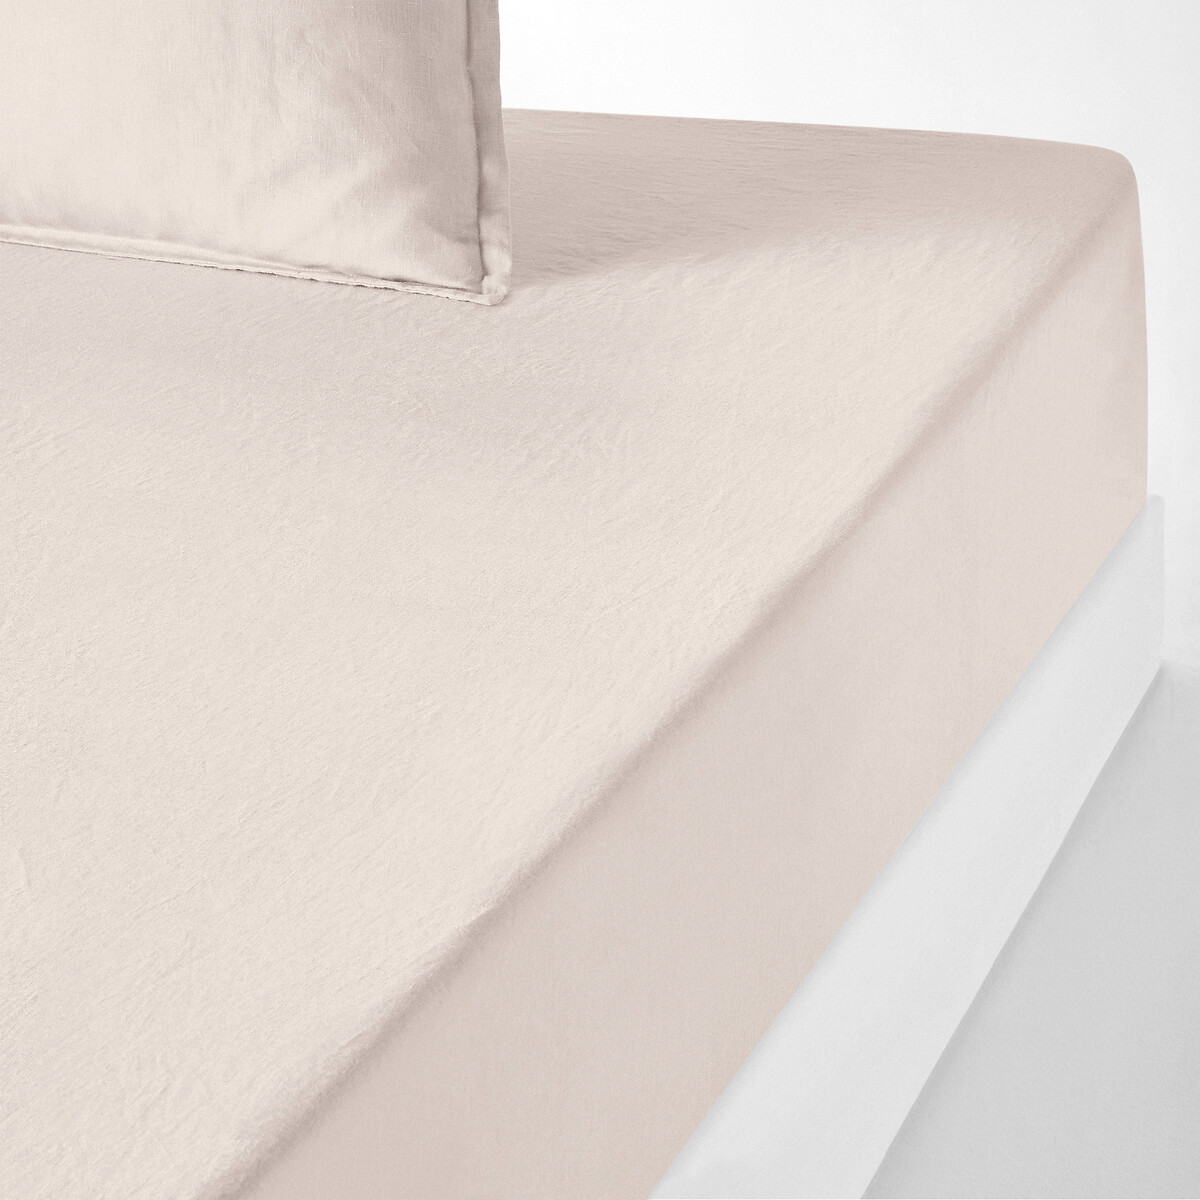 35cm high 100% washed linen fitted sheet